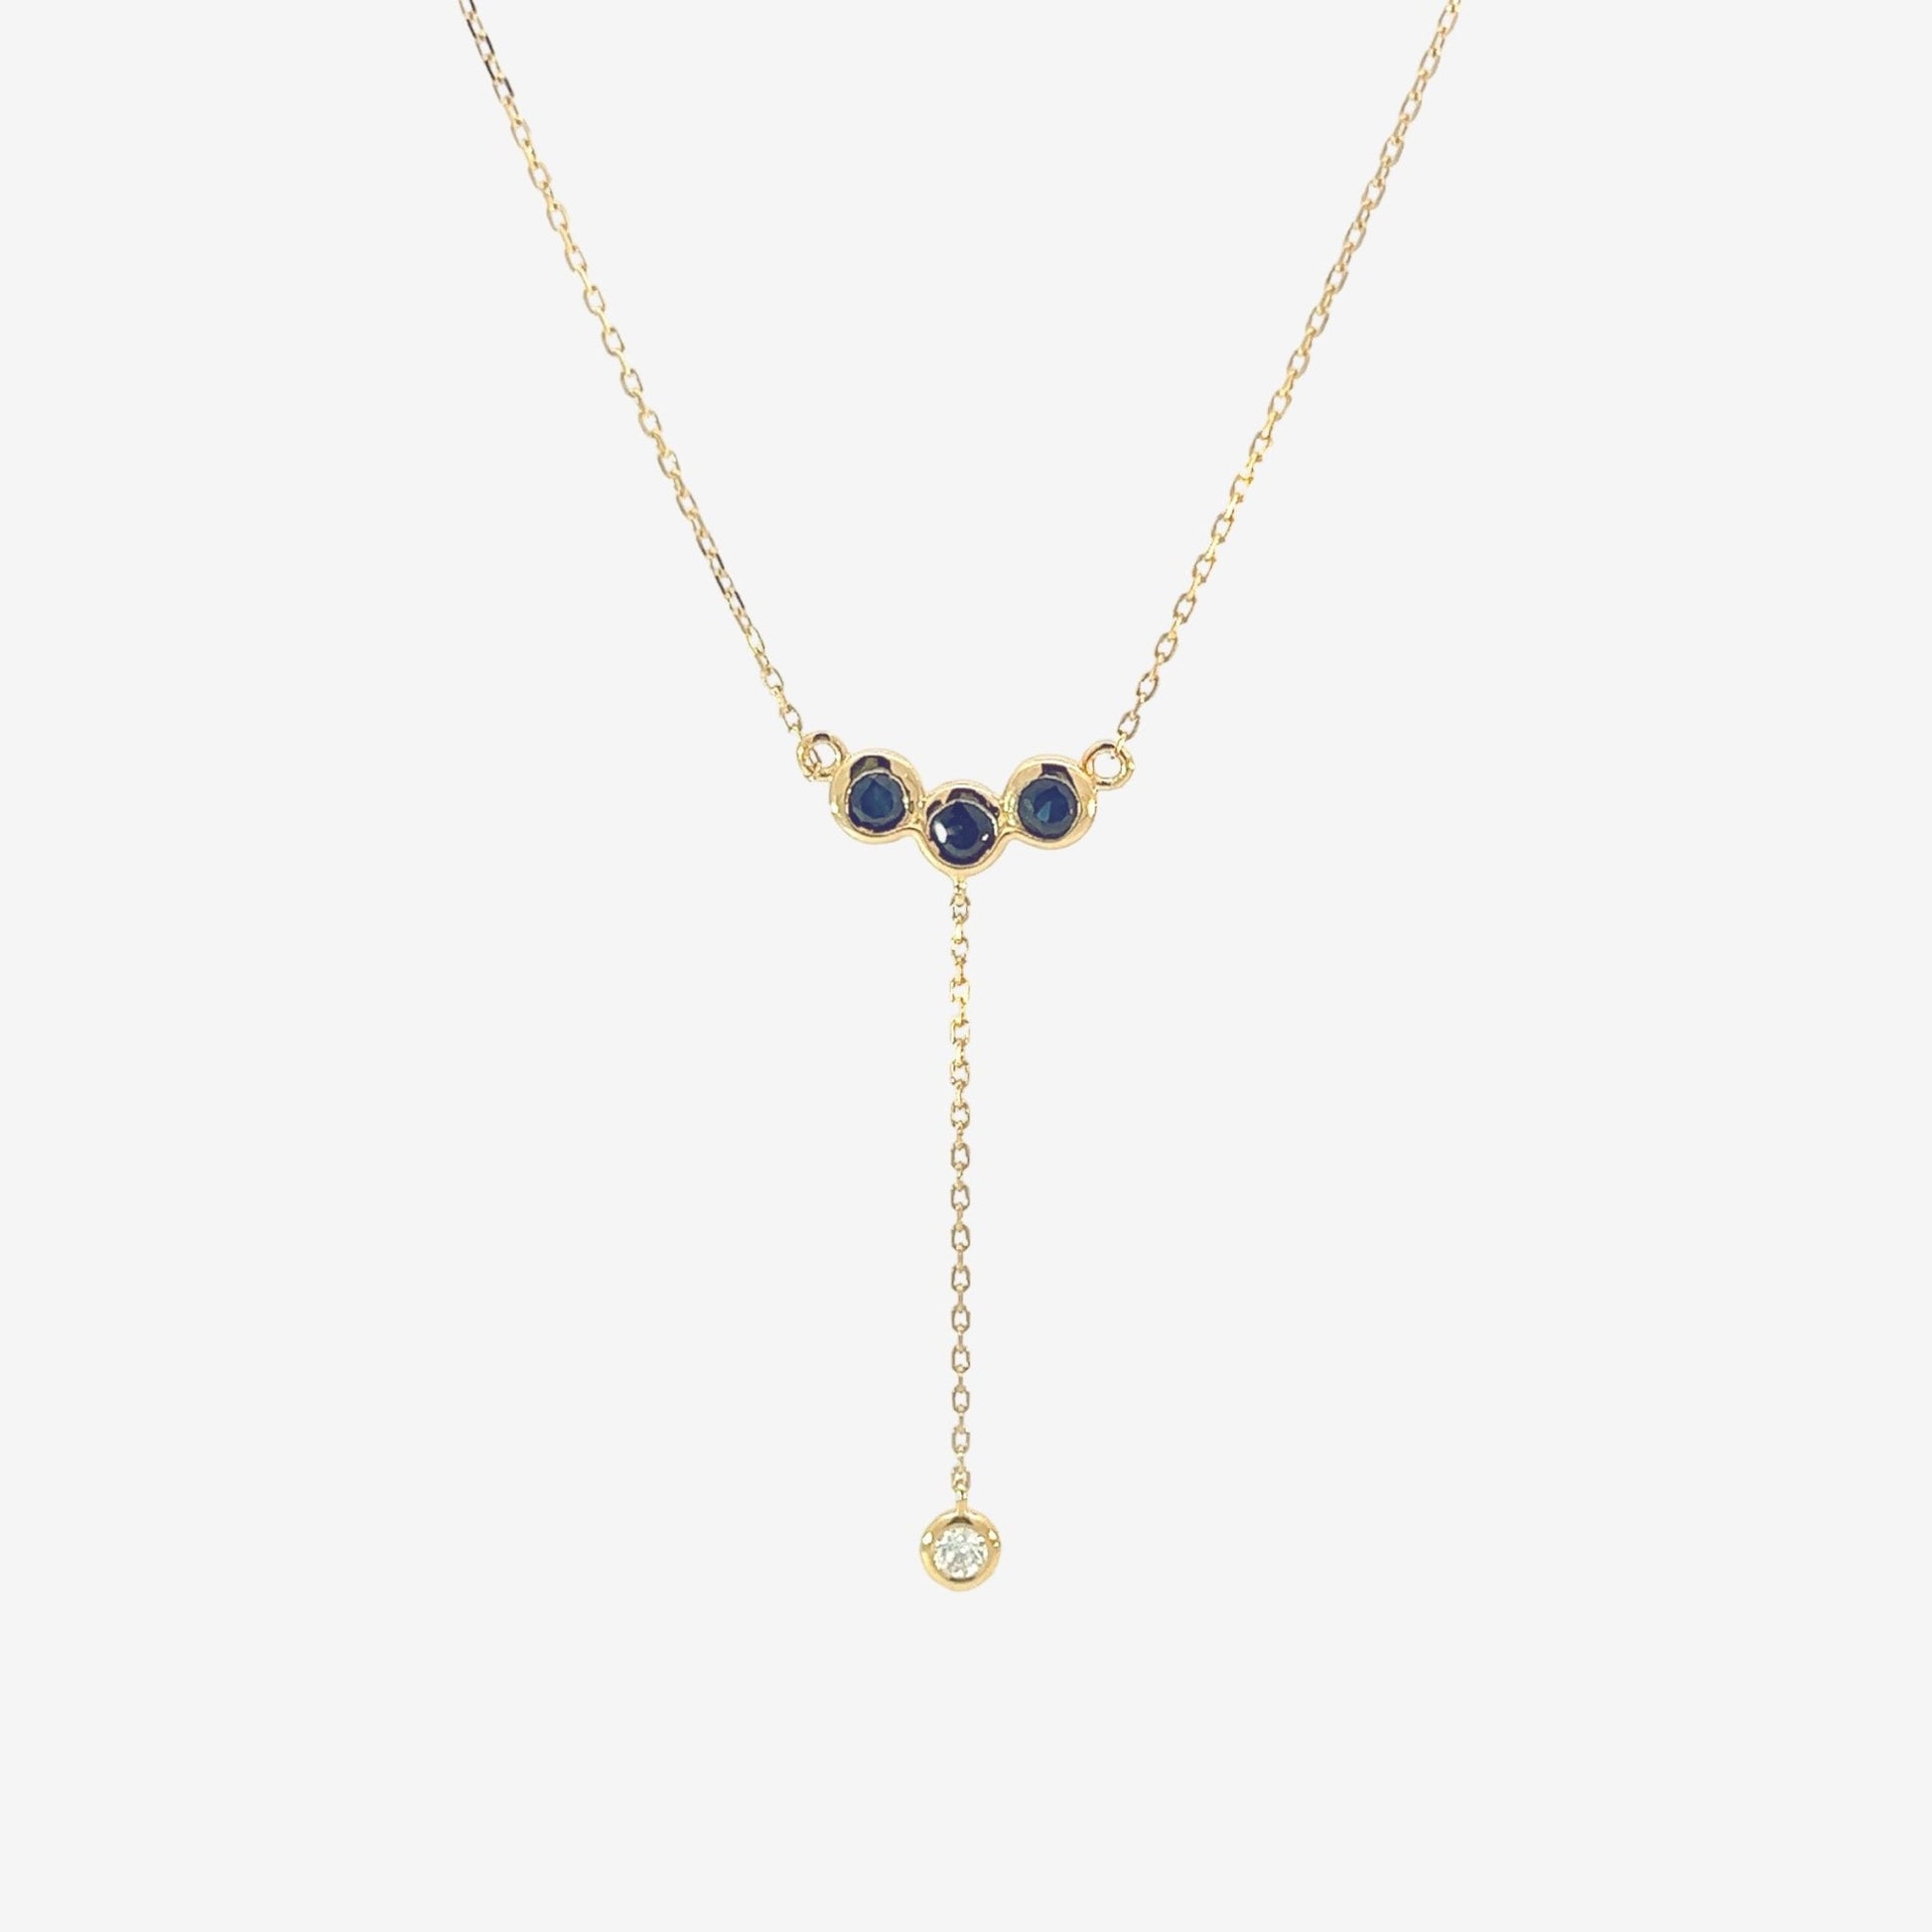 Eleni Necklace in Diamond and Sapphire - 18k Gold - Lynor